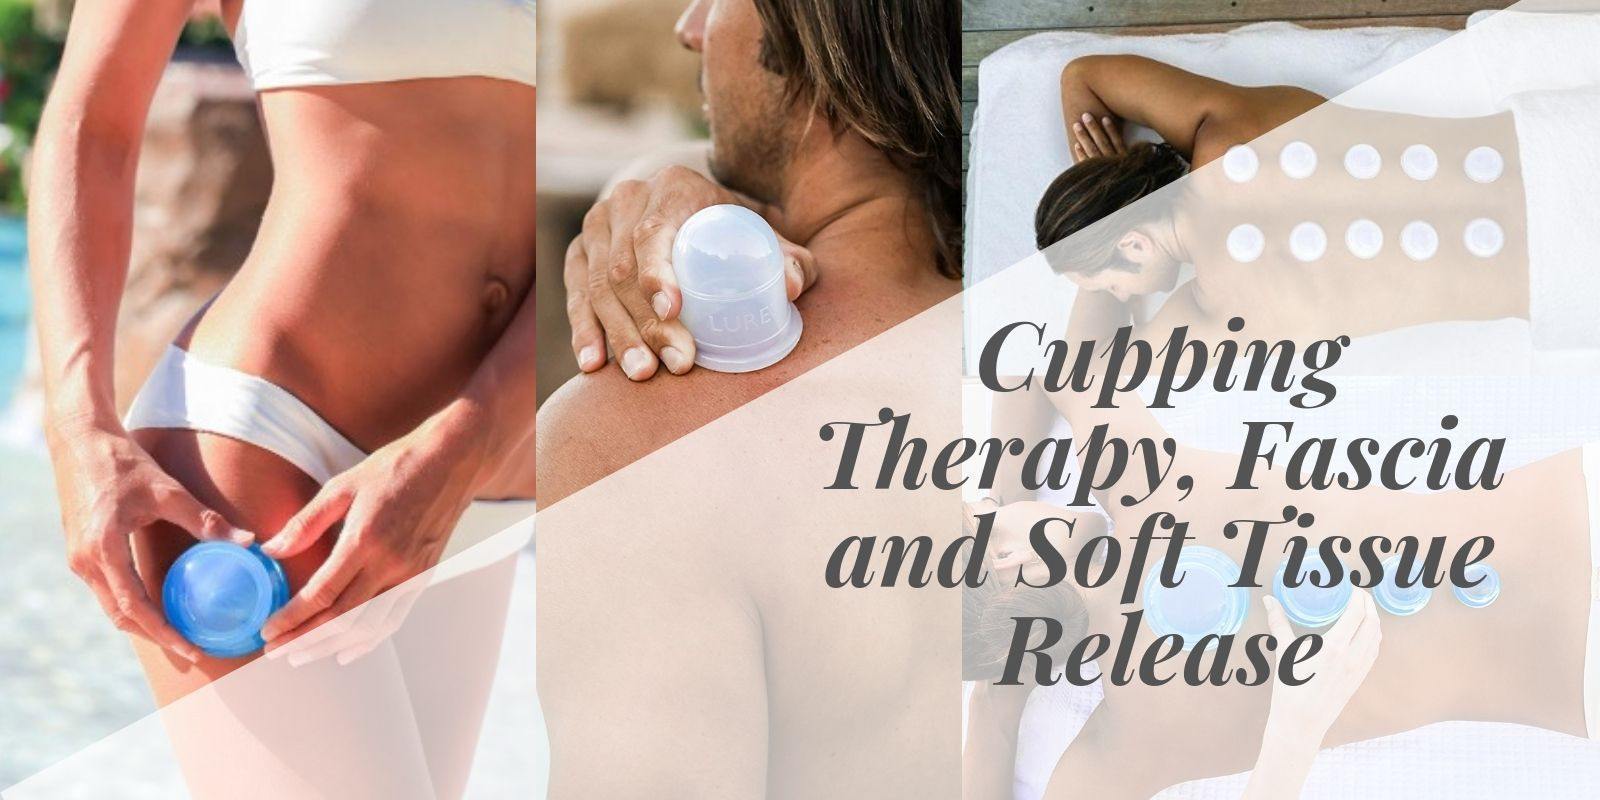 Cupping Therapy, Fascia and Soft Tissue Release - Lure Essentials